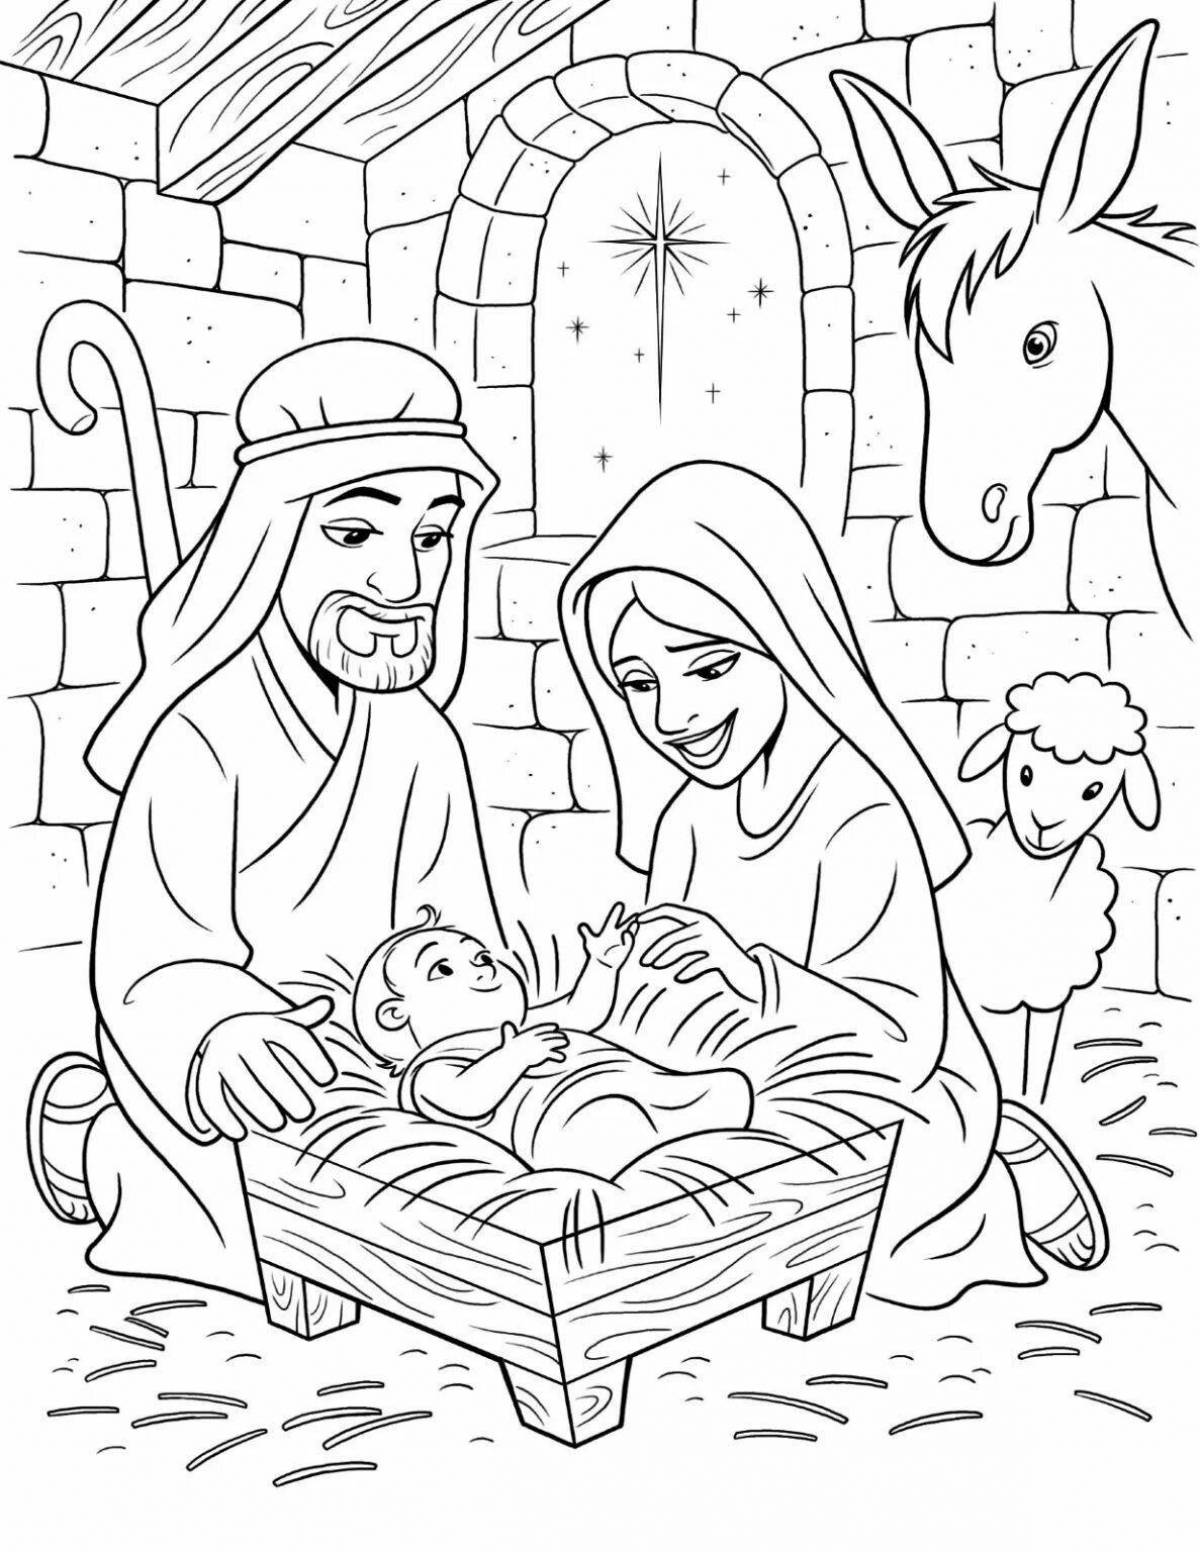 Luminous Christmas coloring book for children 4-5 years old